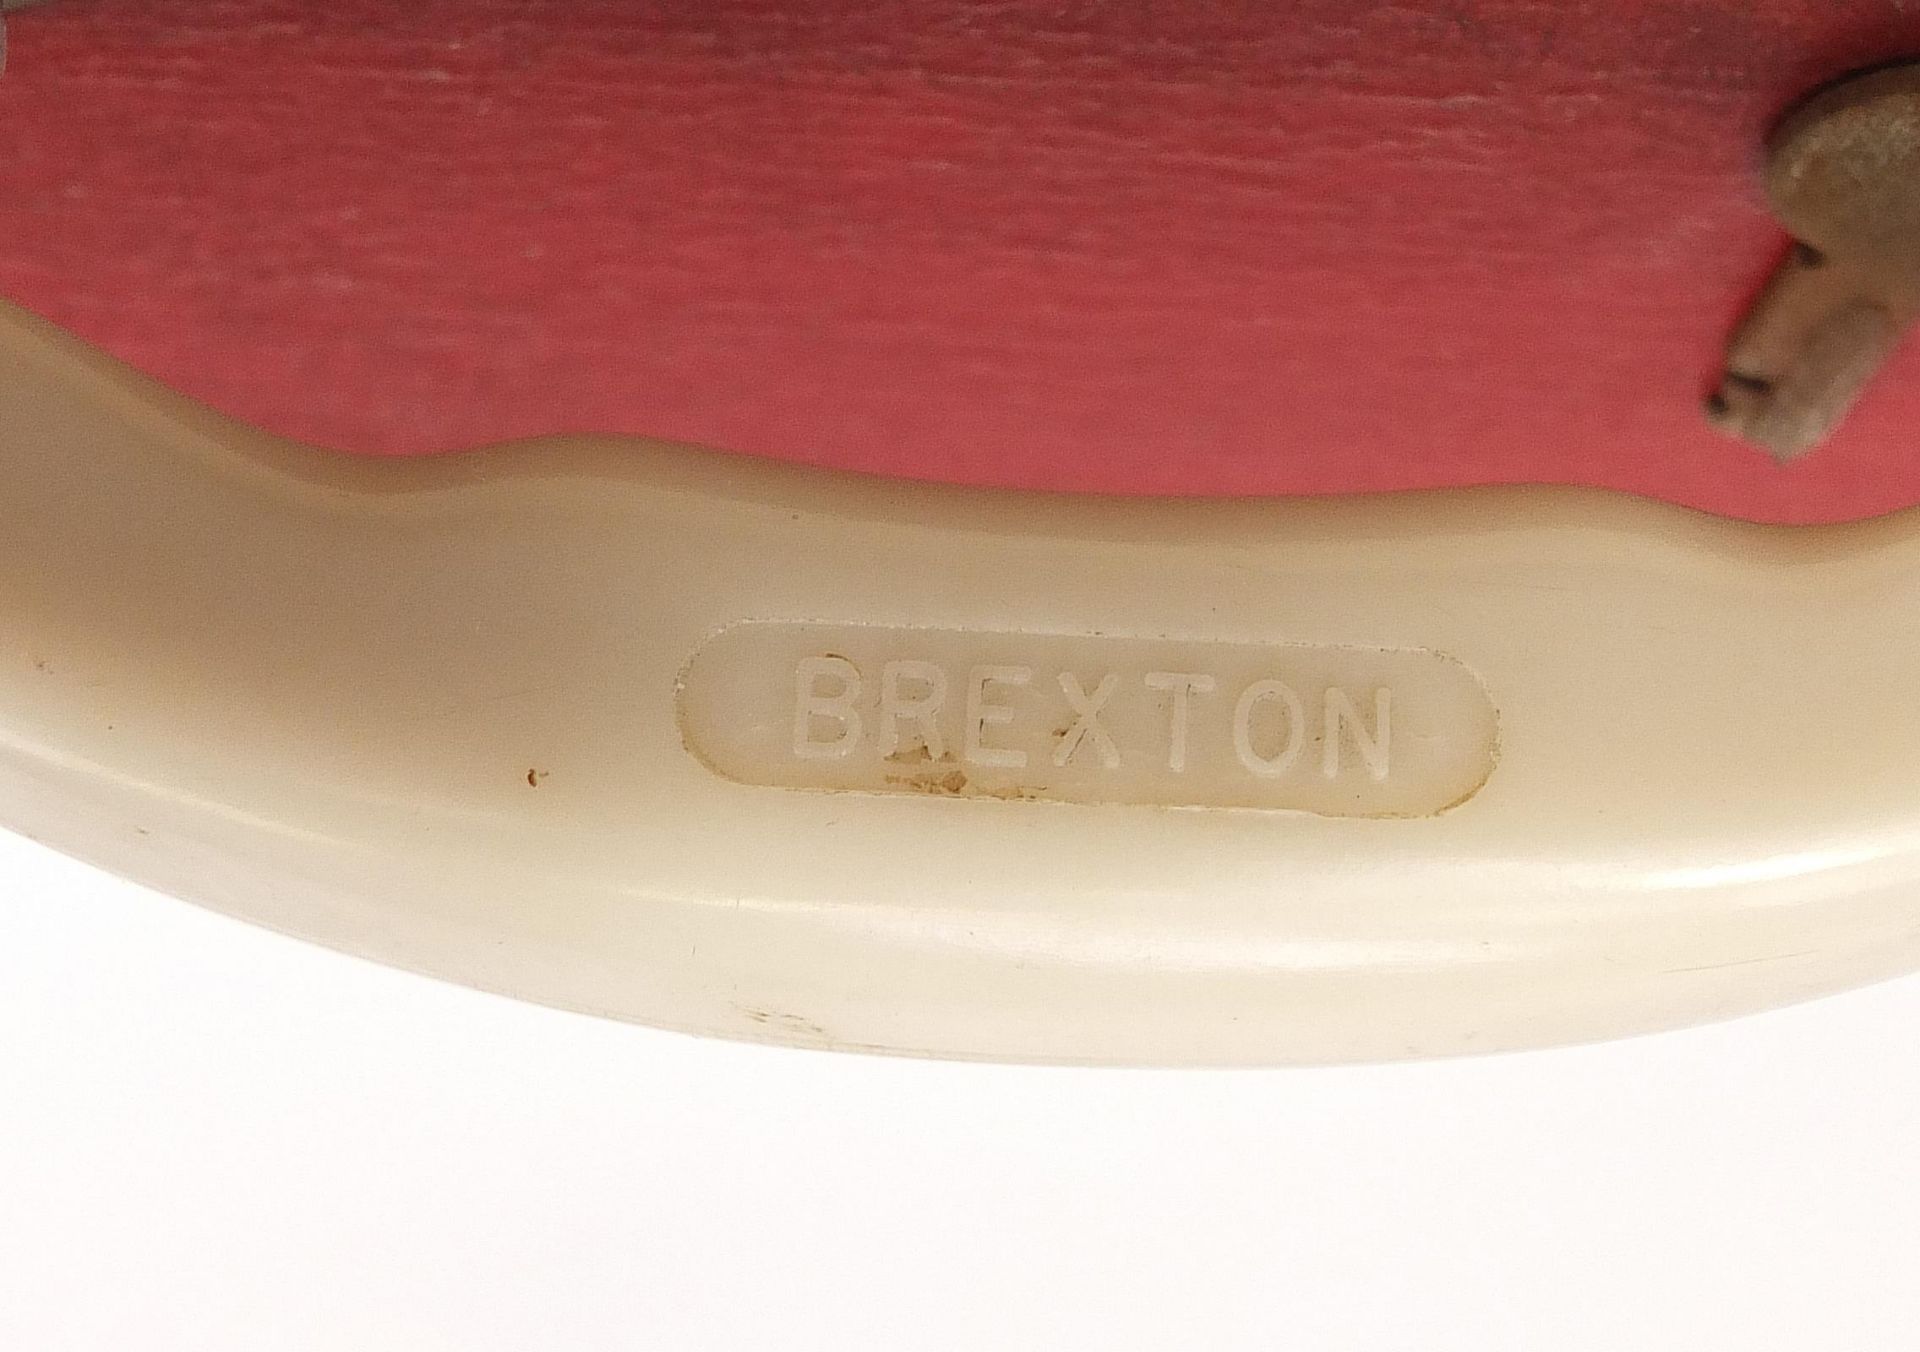 Large red Brexton picnic hamper retailed by Harrods of London, the hamper comprising Thermos flasks, - Image 8 of 8